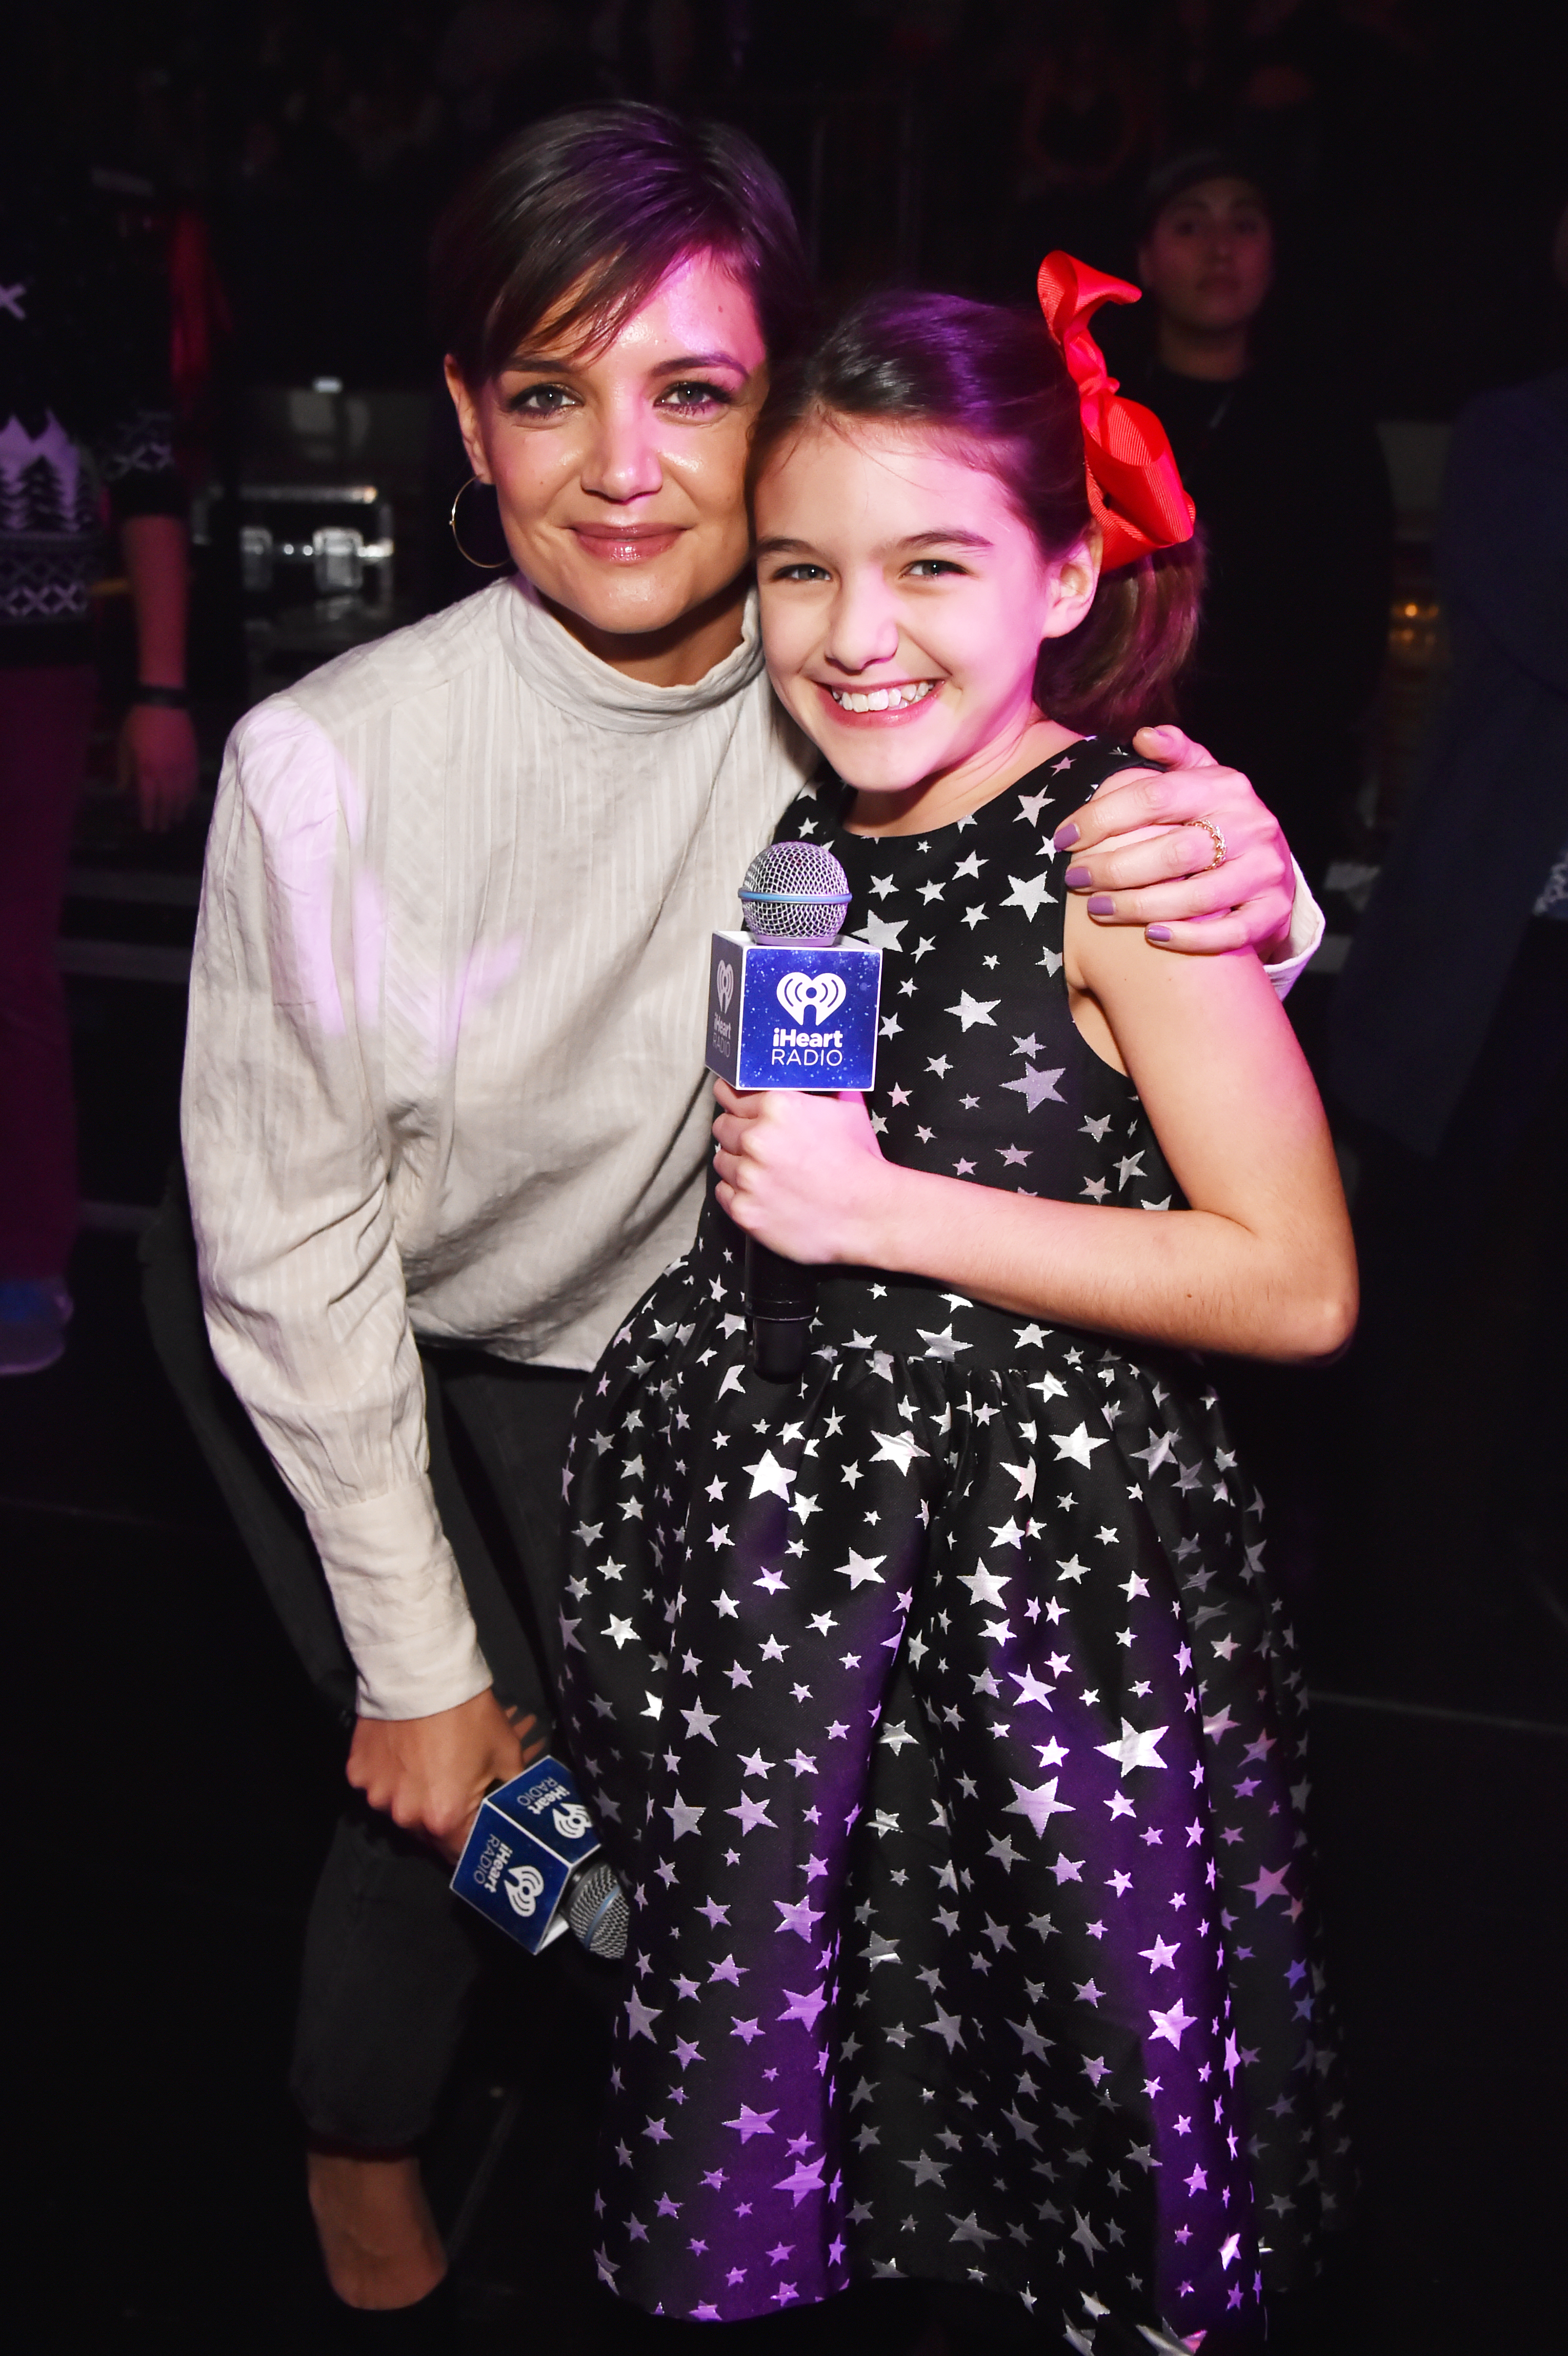 Katie Holmes and Suri Cruise at the Z100's Jingle Ball in New York City on December 8, 2017 | Source: Getty Images